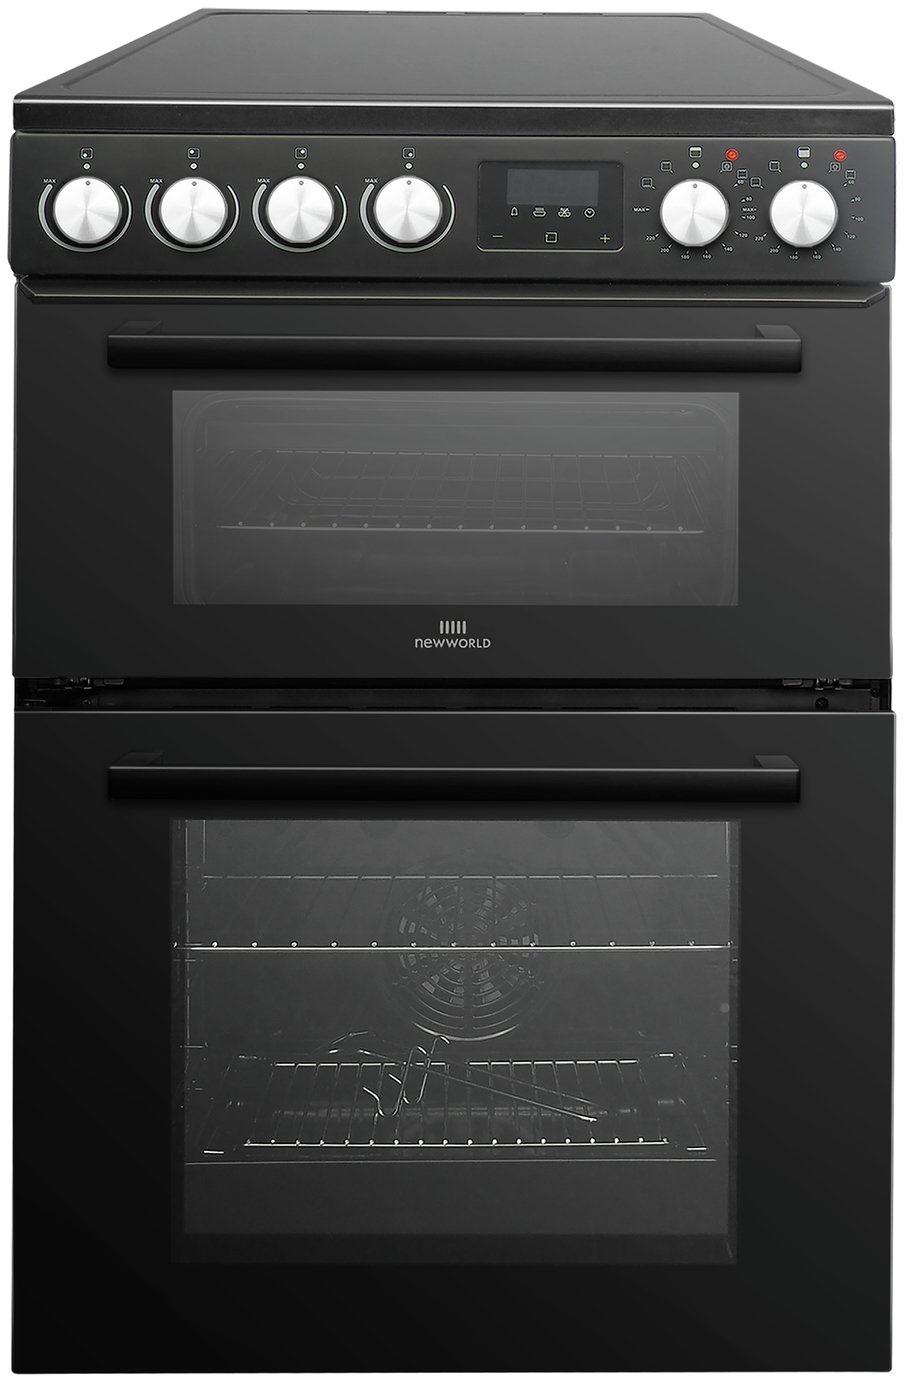 New World NWLS50DCB 50cm Double Oven Electric Cooker - Black